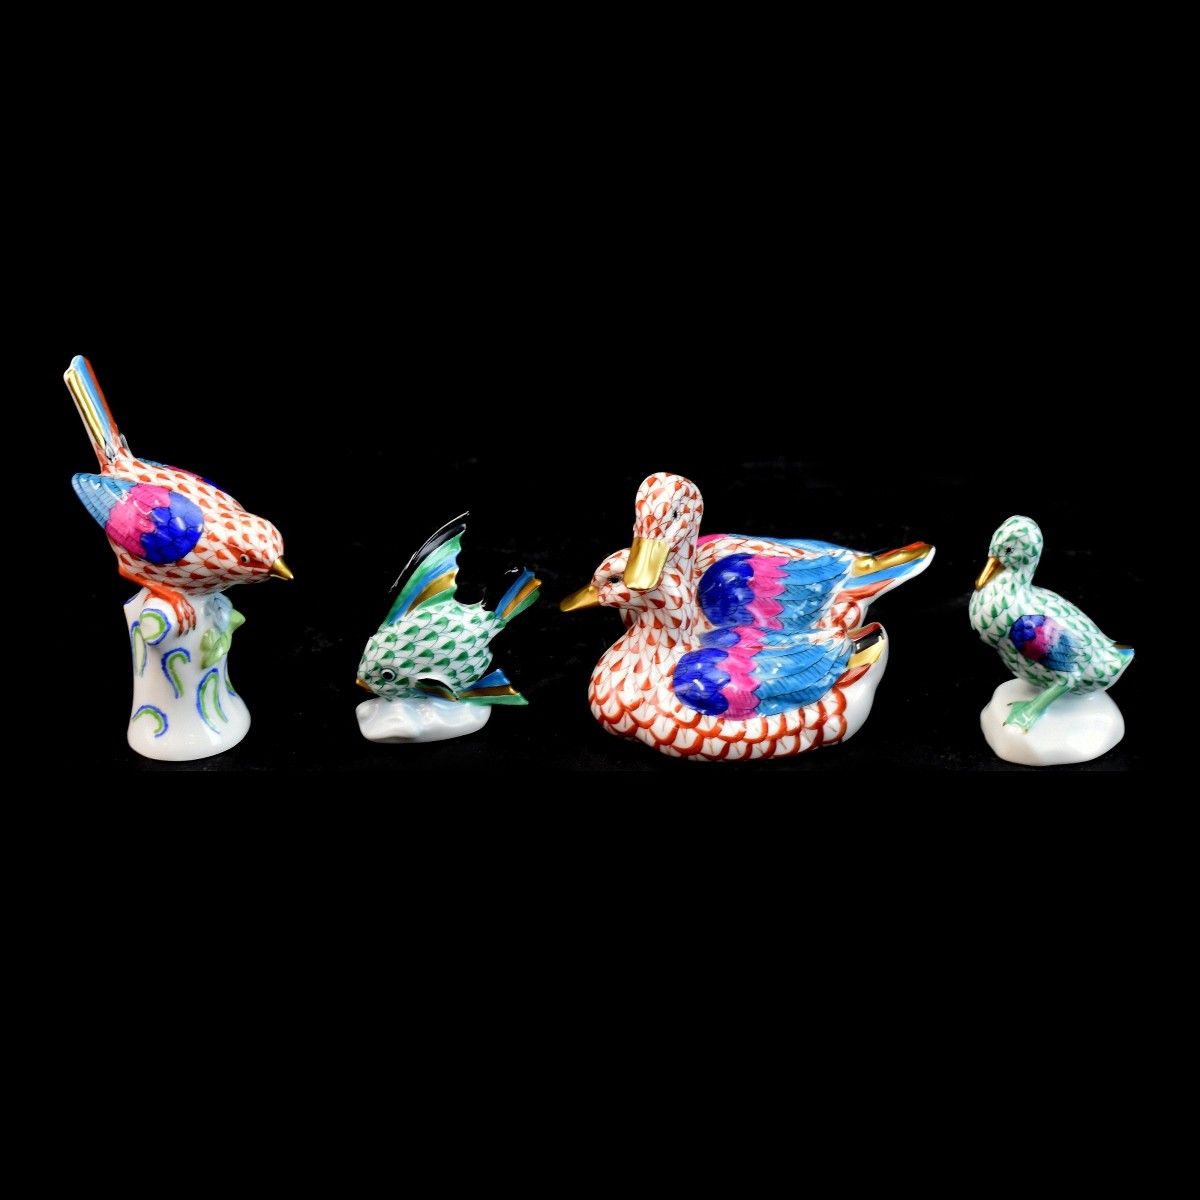 Four (4) Herend Porcelain Figurines